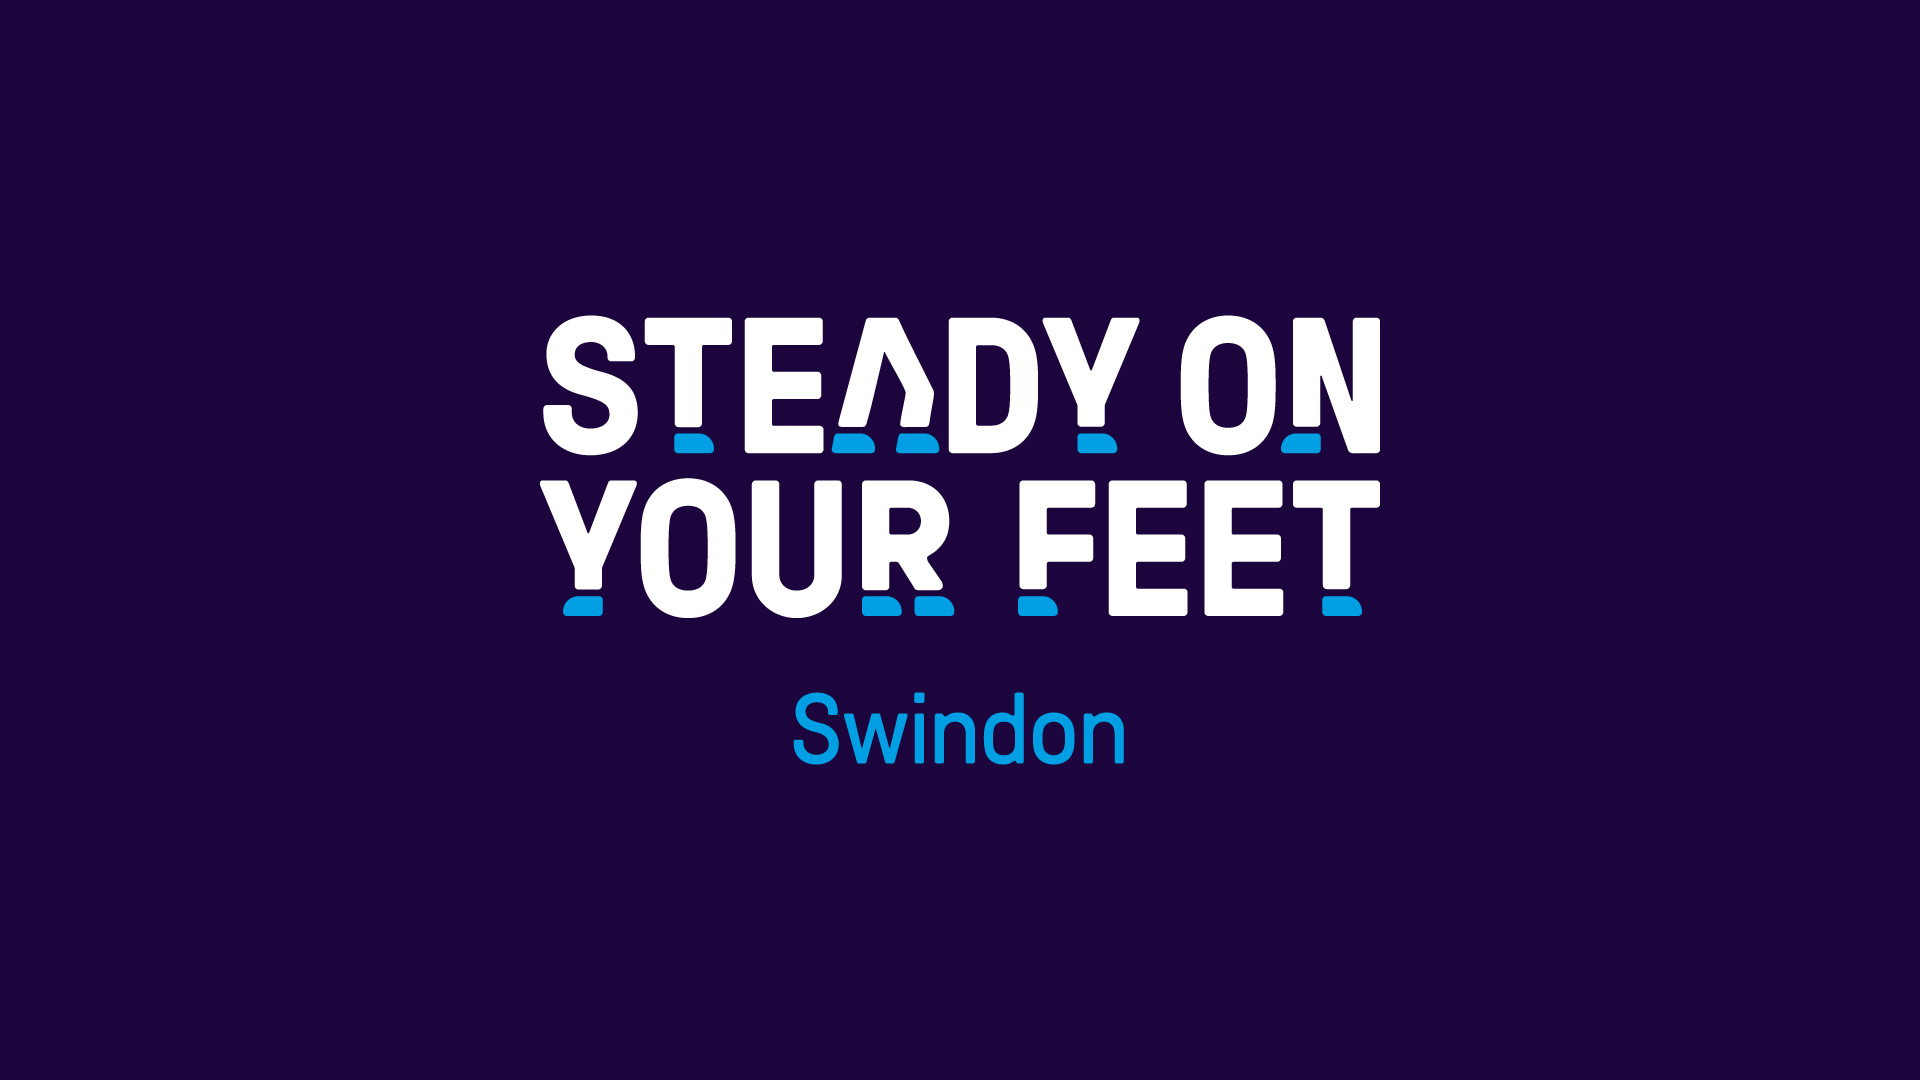 Steady On Your Feet launches in Swindon